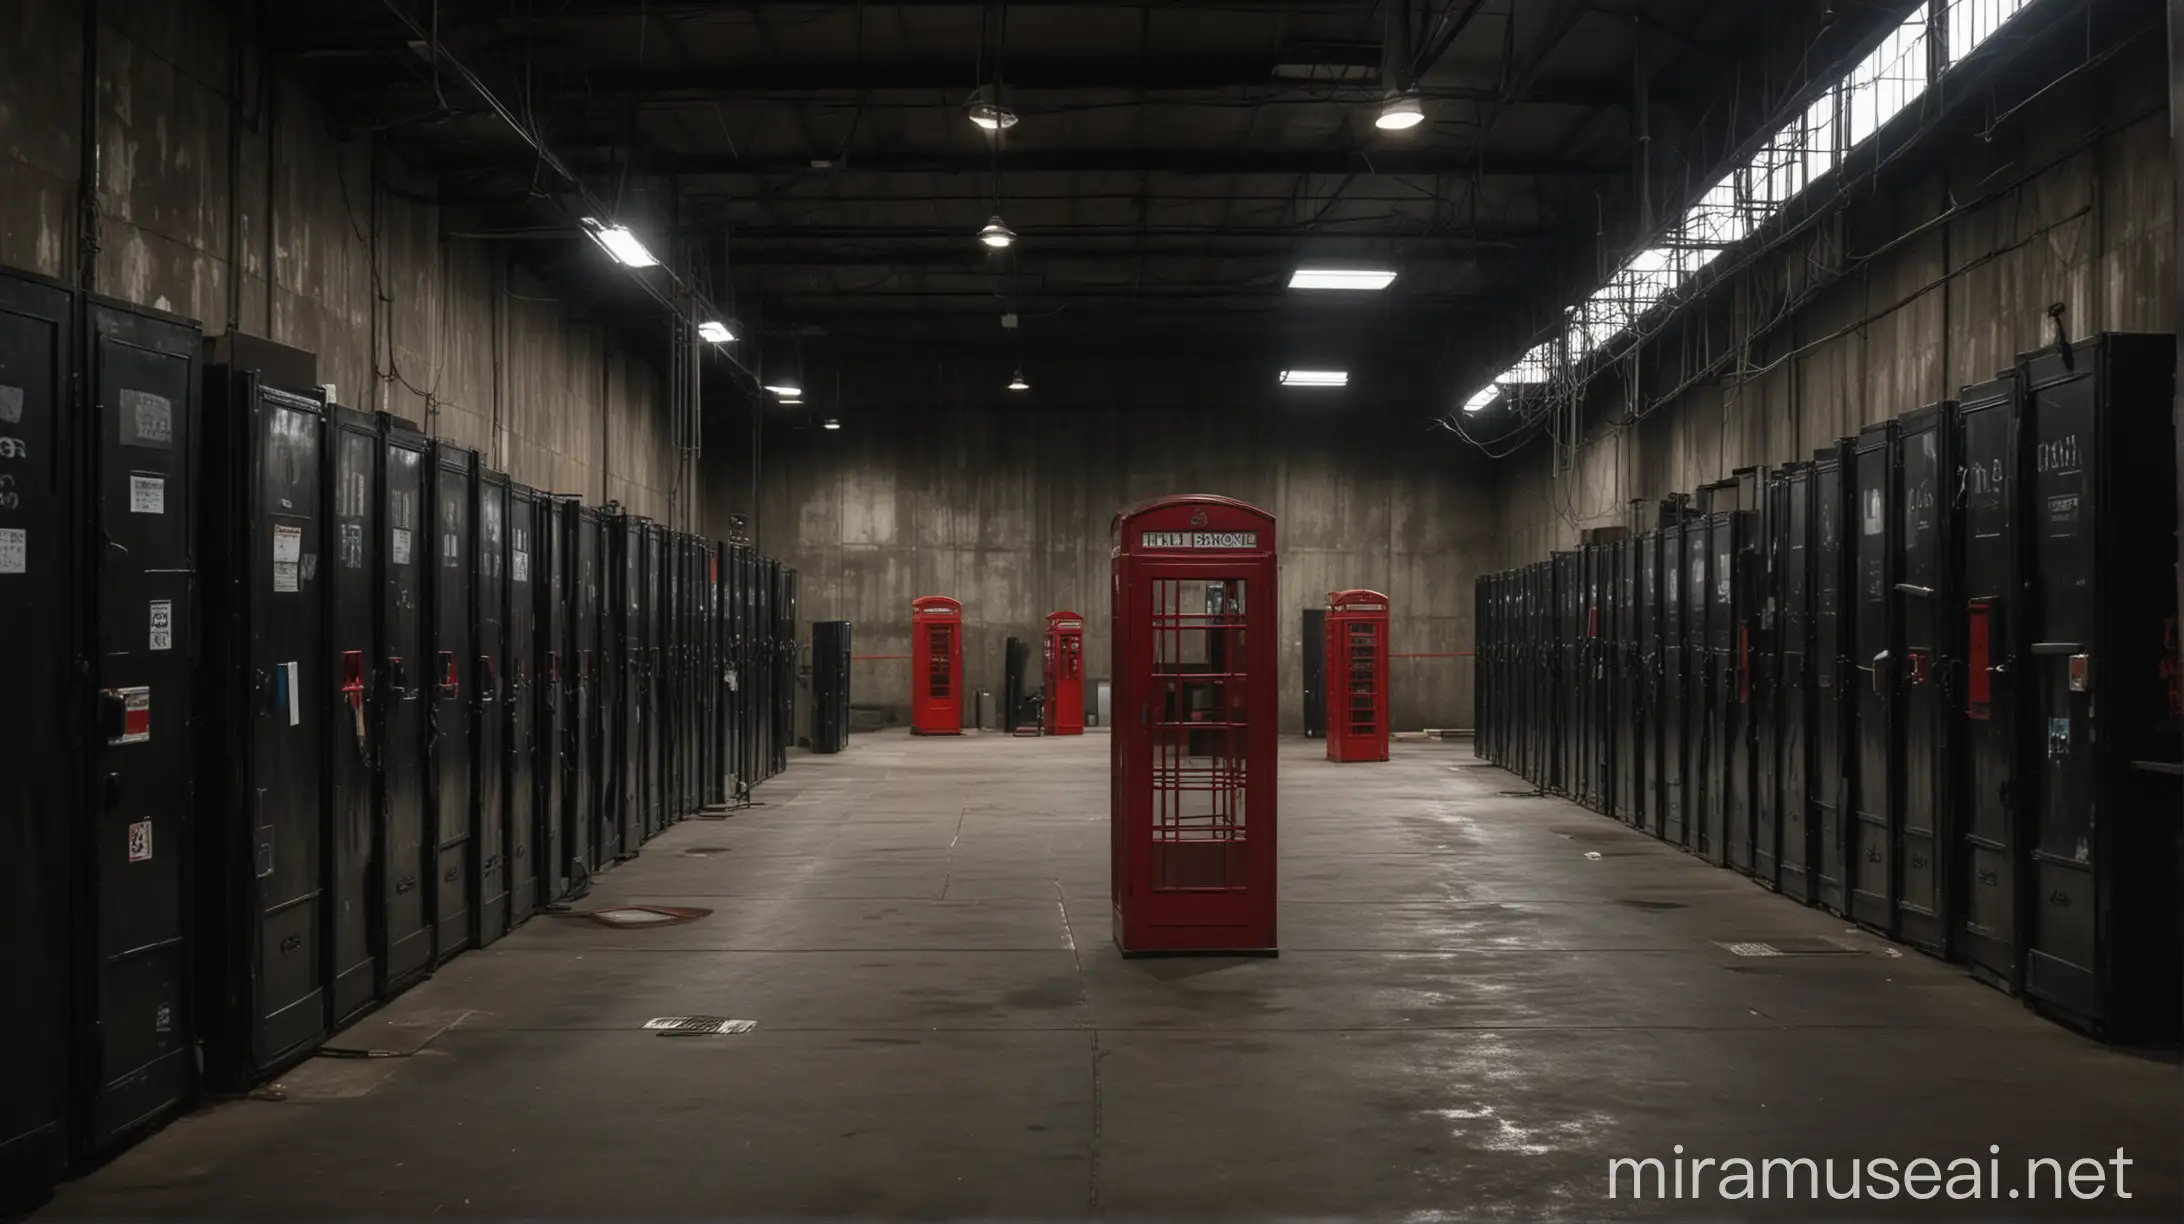 overly big warehouse with black boxes on shelves and dark aesthetic and some mysterious source of light on main aisle, hanging around the warehouse, 
Red simple phone booth with wide windows standing in the middle of warehouse